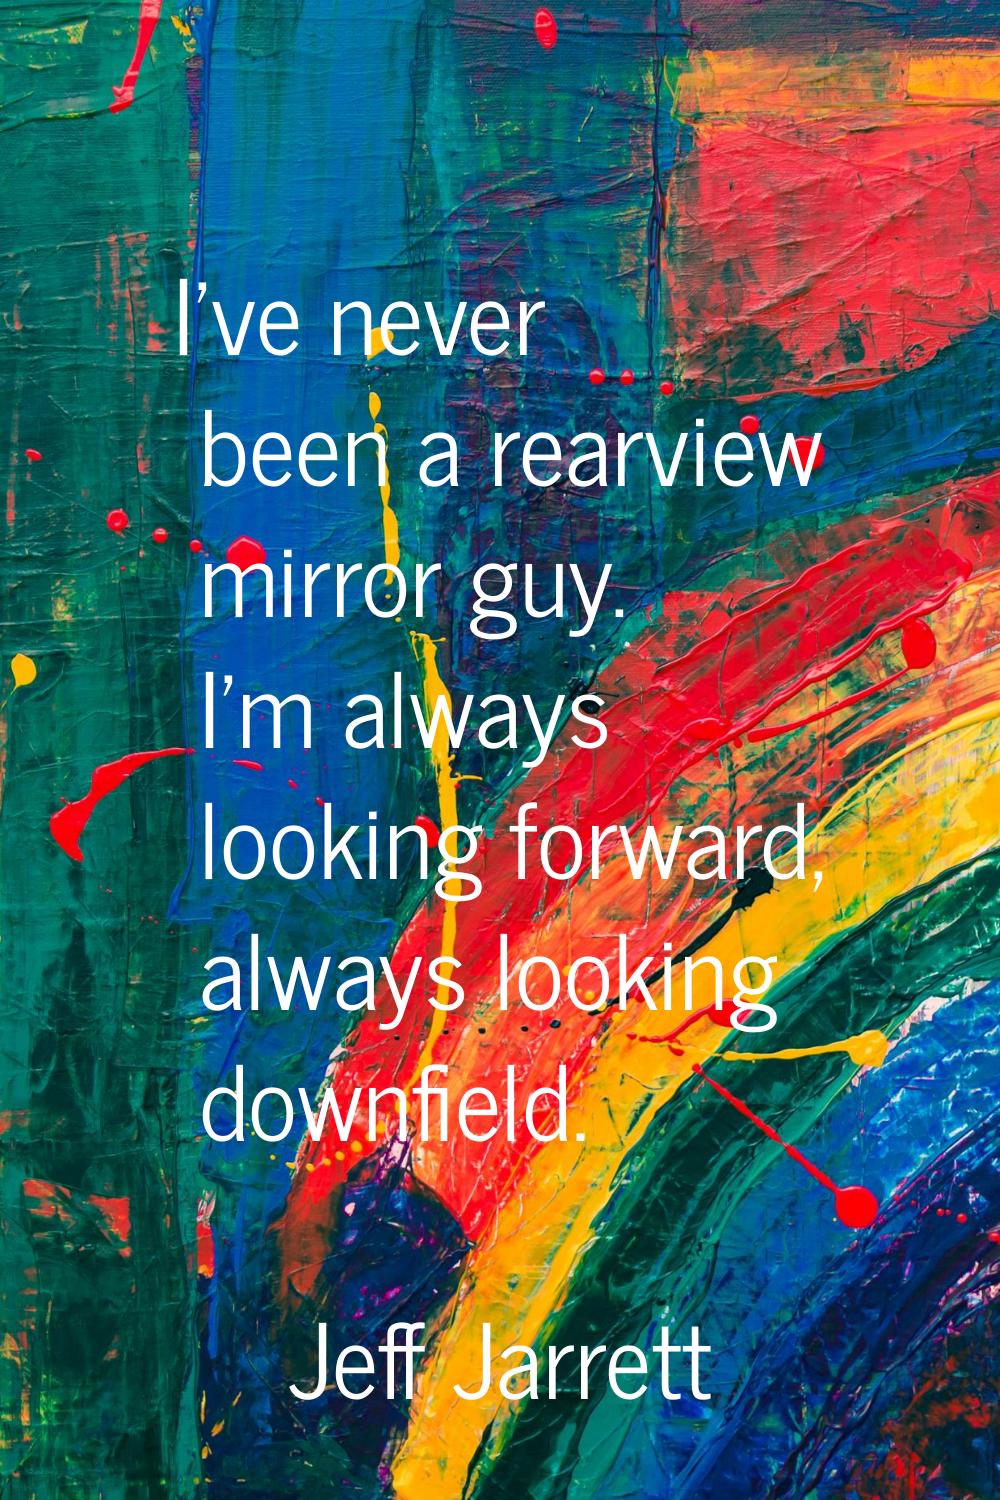 I've never been a rearview mirror guy. I'm always looking forward, always looking downfield.